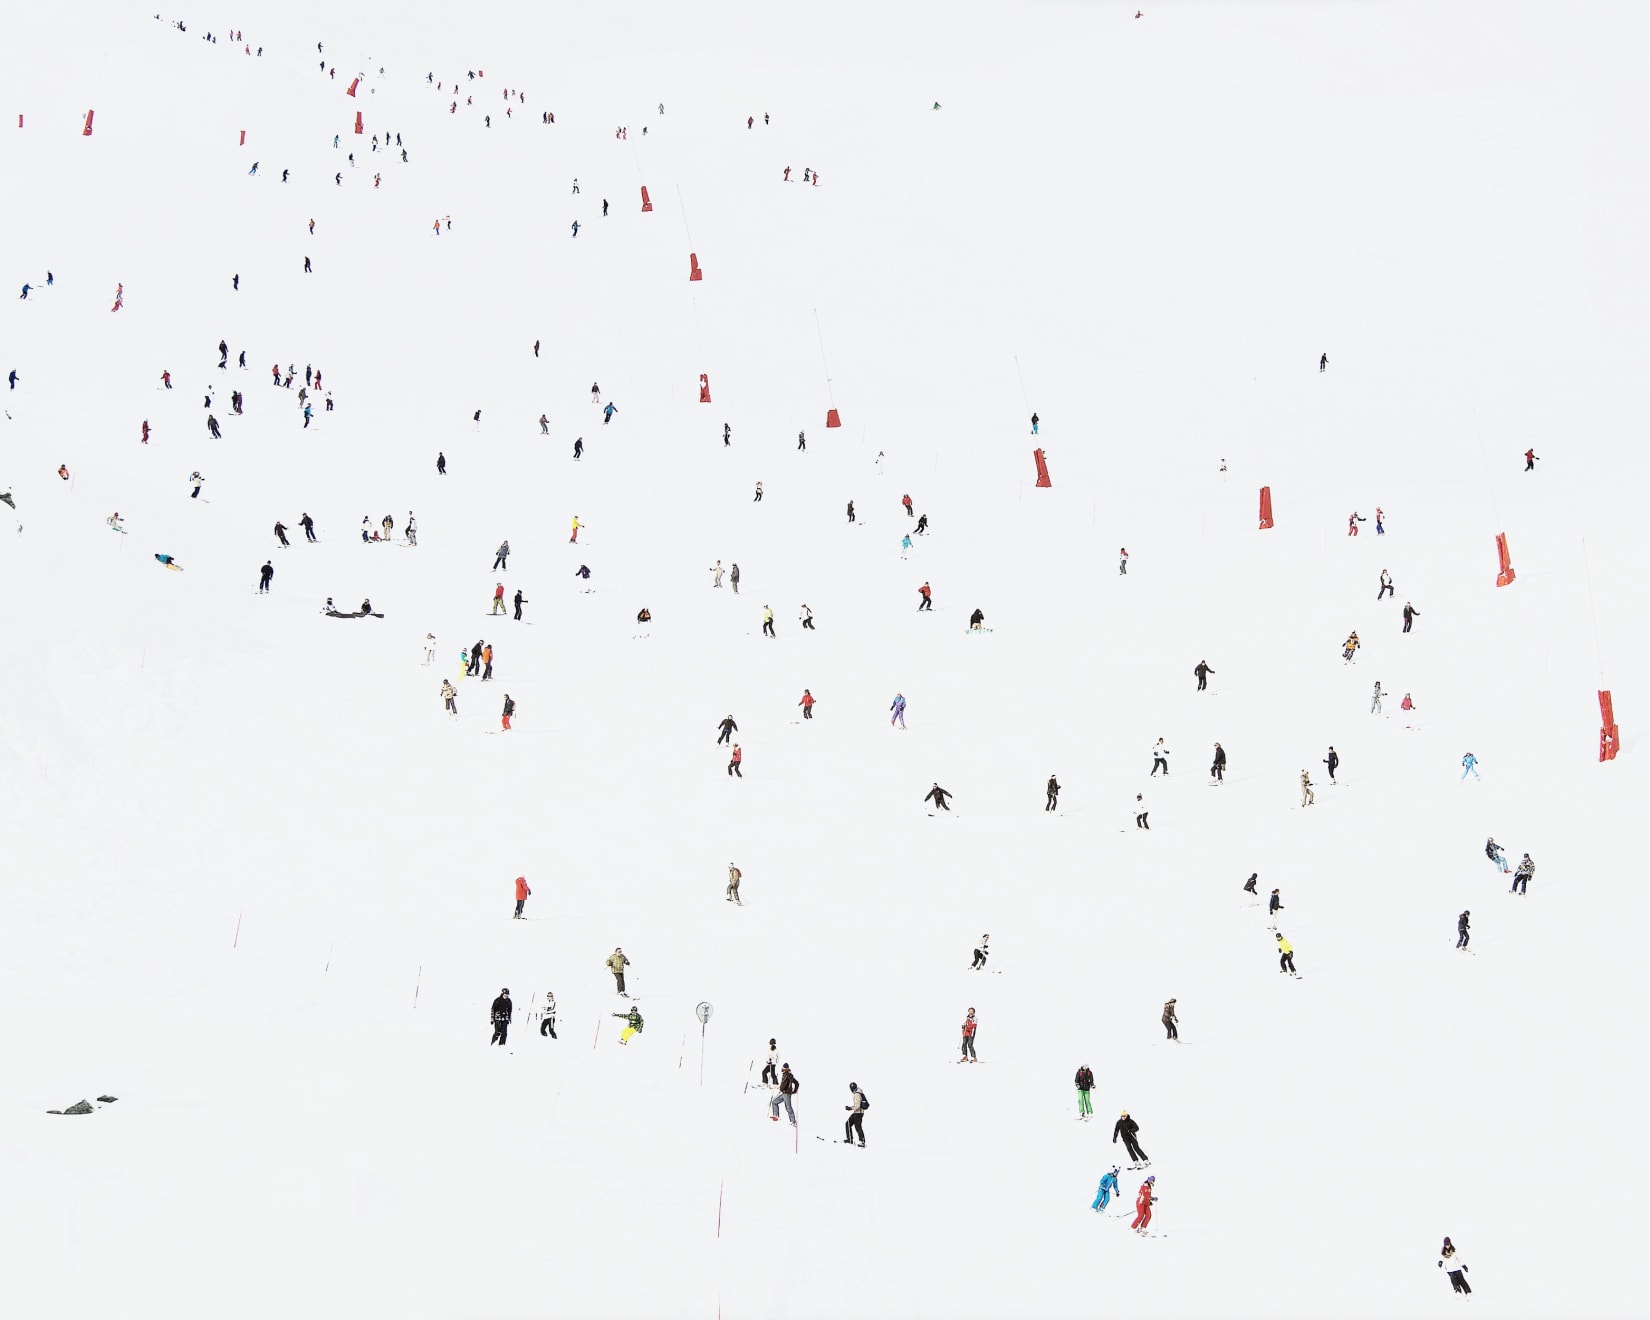 Overcrowded (Courchevel), 2012